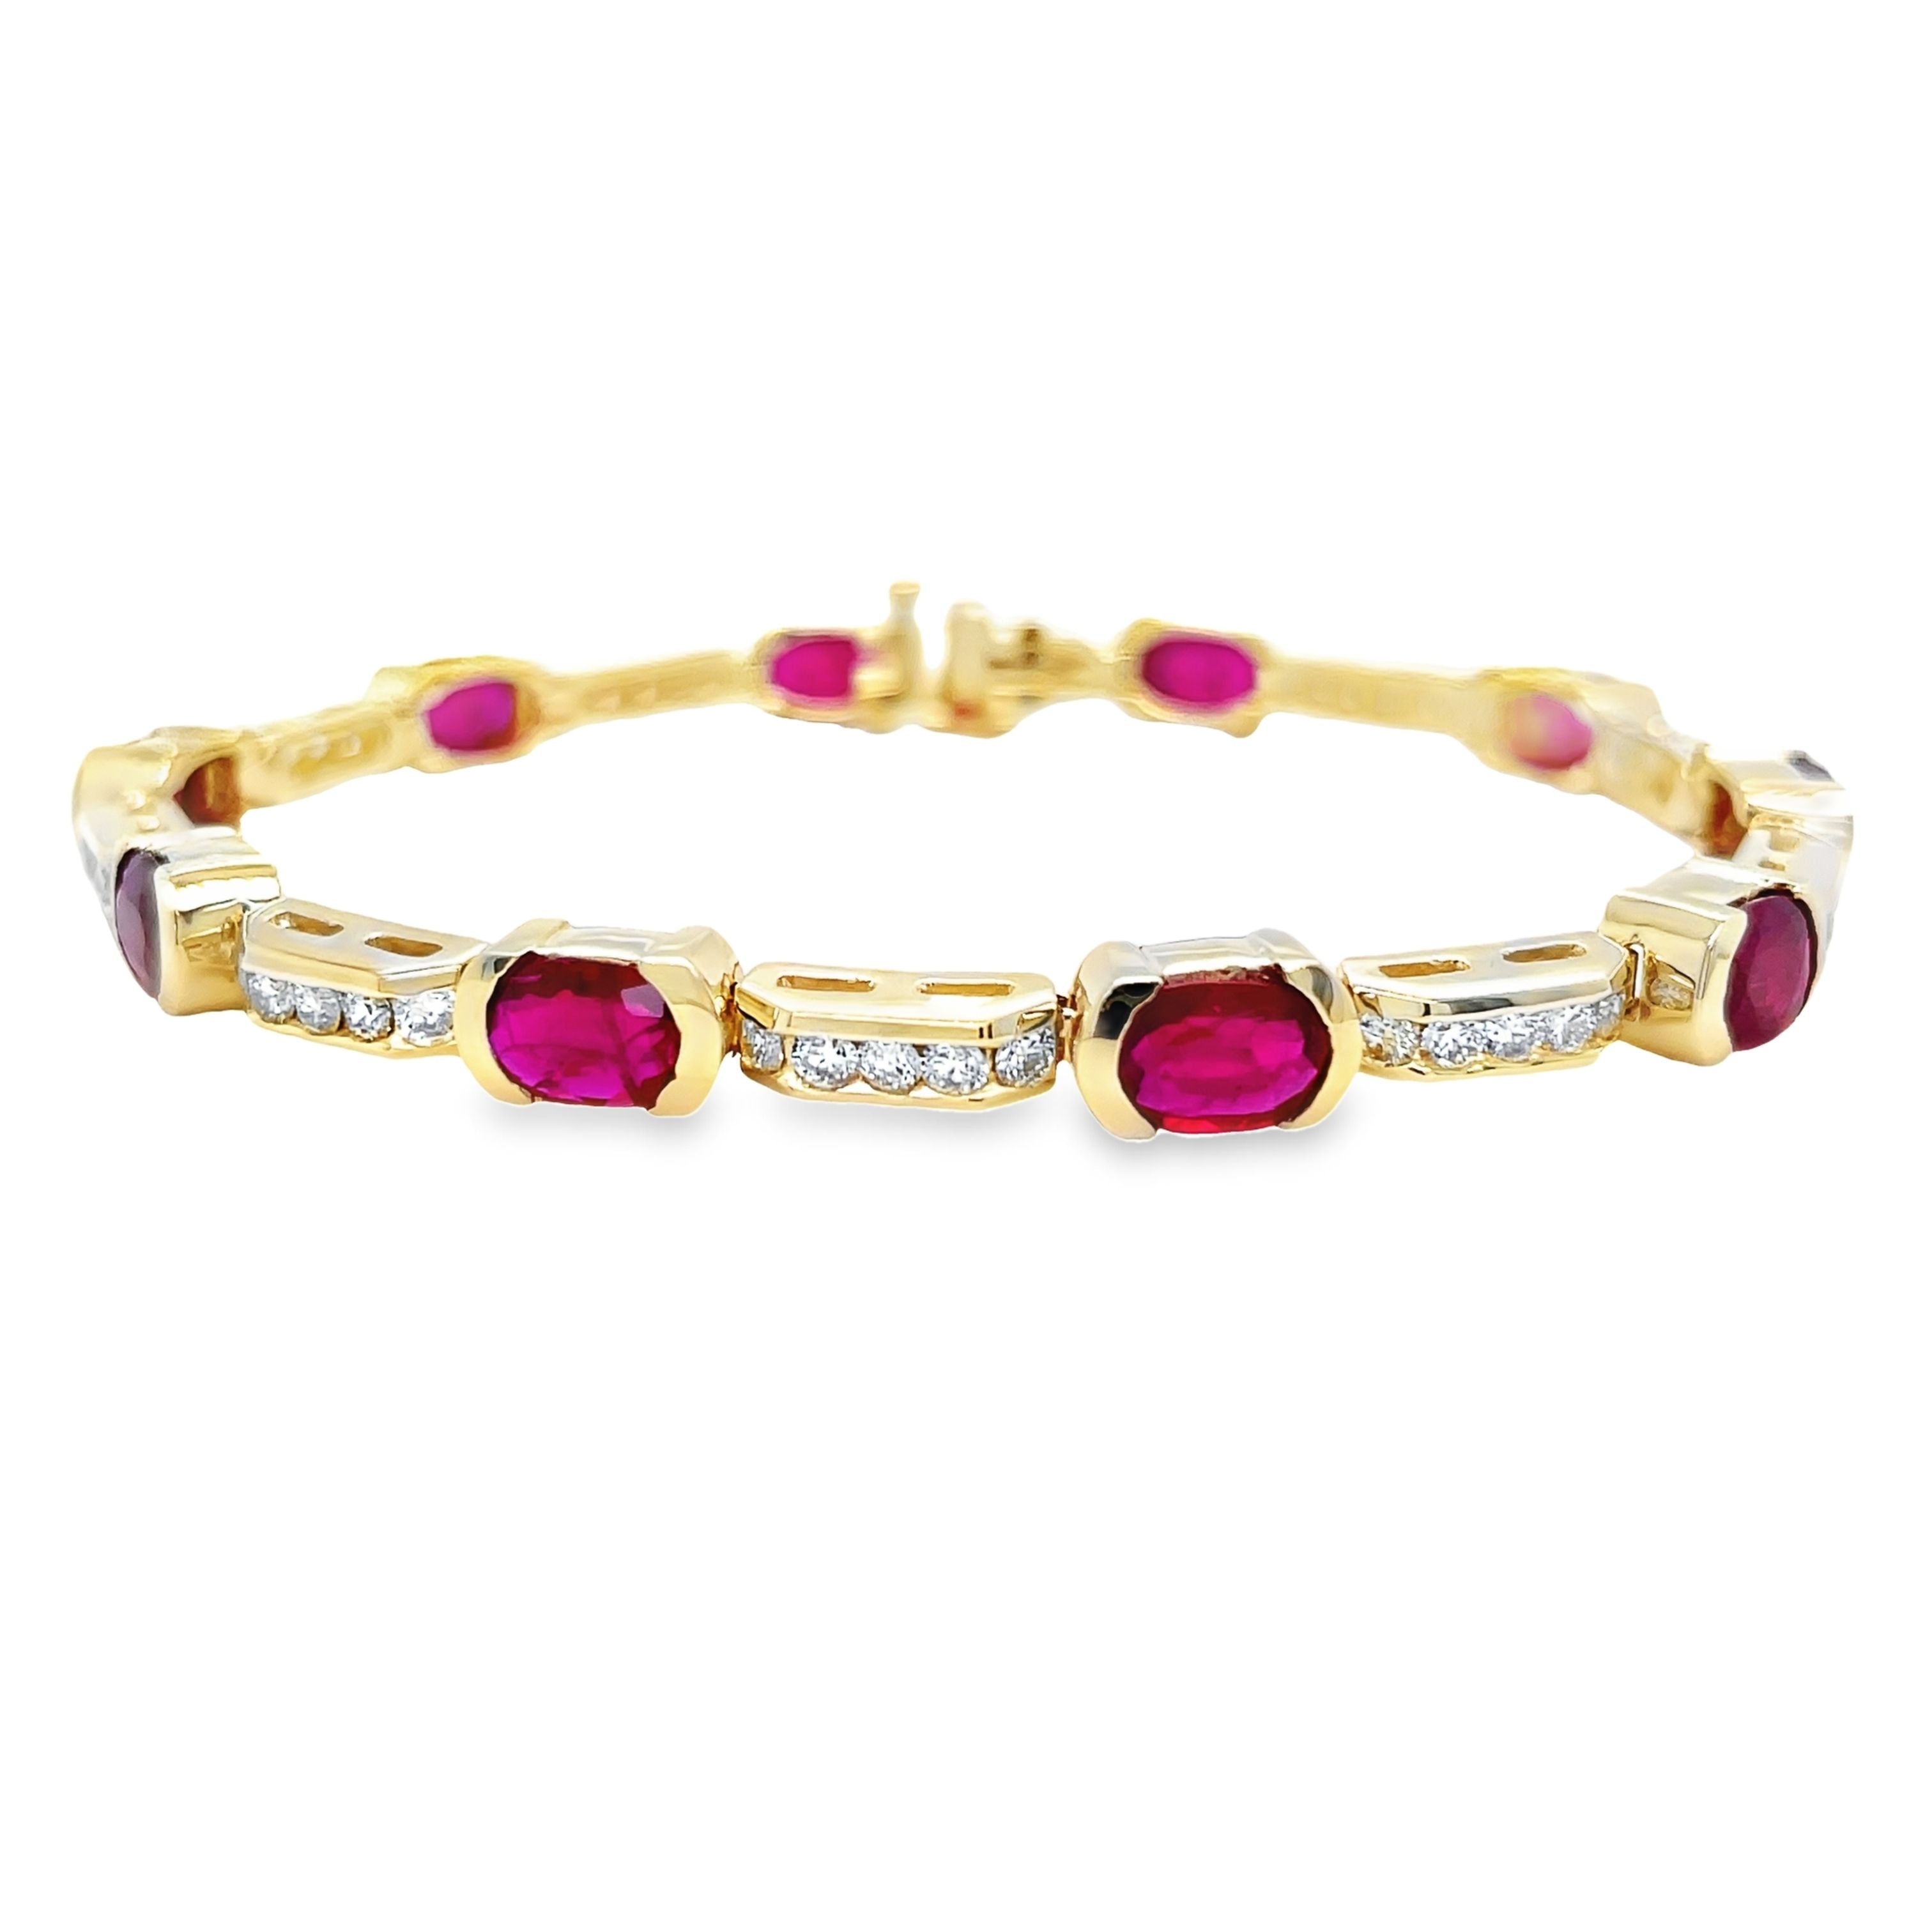 Experience the elegance and glamour of our Fine Diamond & Ruby Oval Shape Bracelet. Crafted from 14k yellow gold, this one-of-a-kind bracelet features smooth movement, a hidden clasp, and a stunning combination of oval shape rubies (7.45 cts) and round diamonds (2.00 cts). Impress with 7 inches of pure luxury.